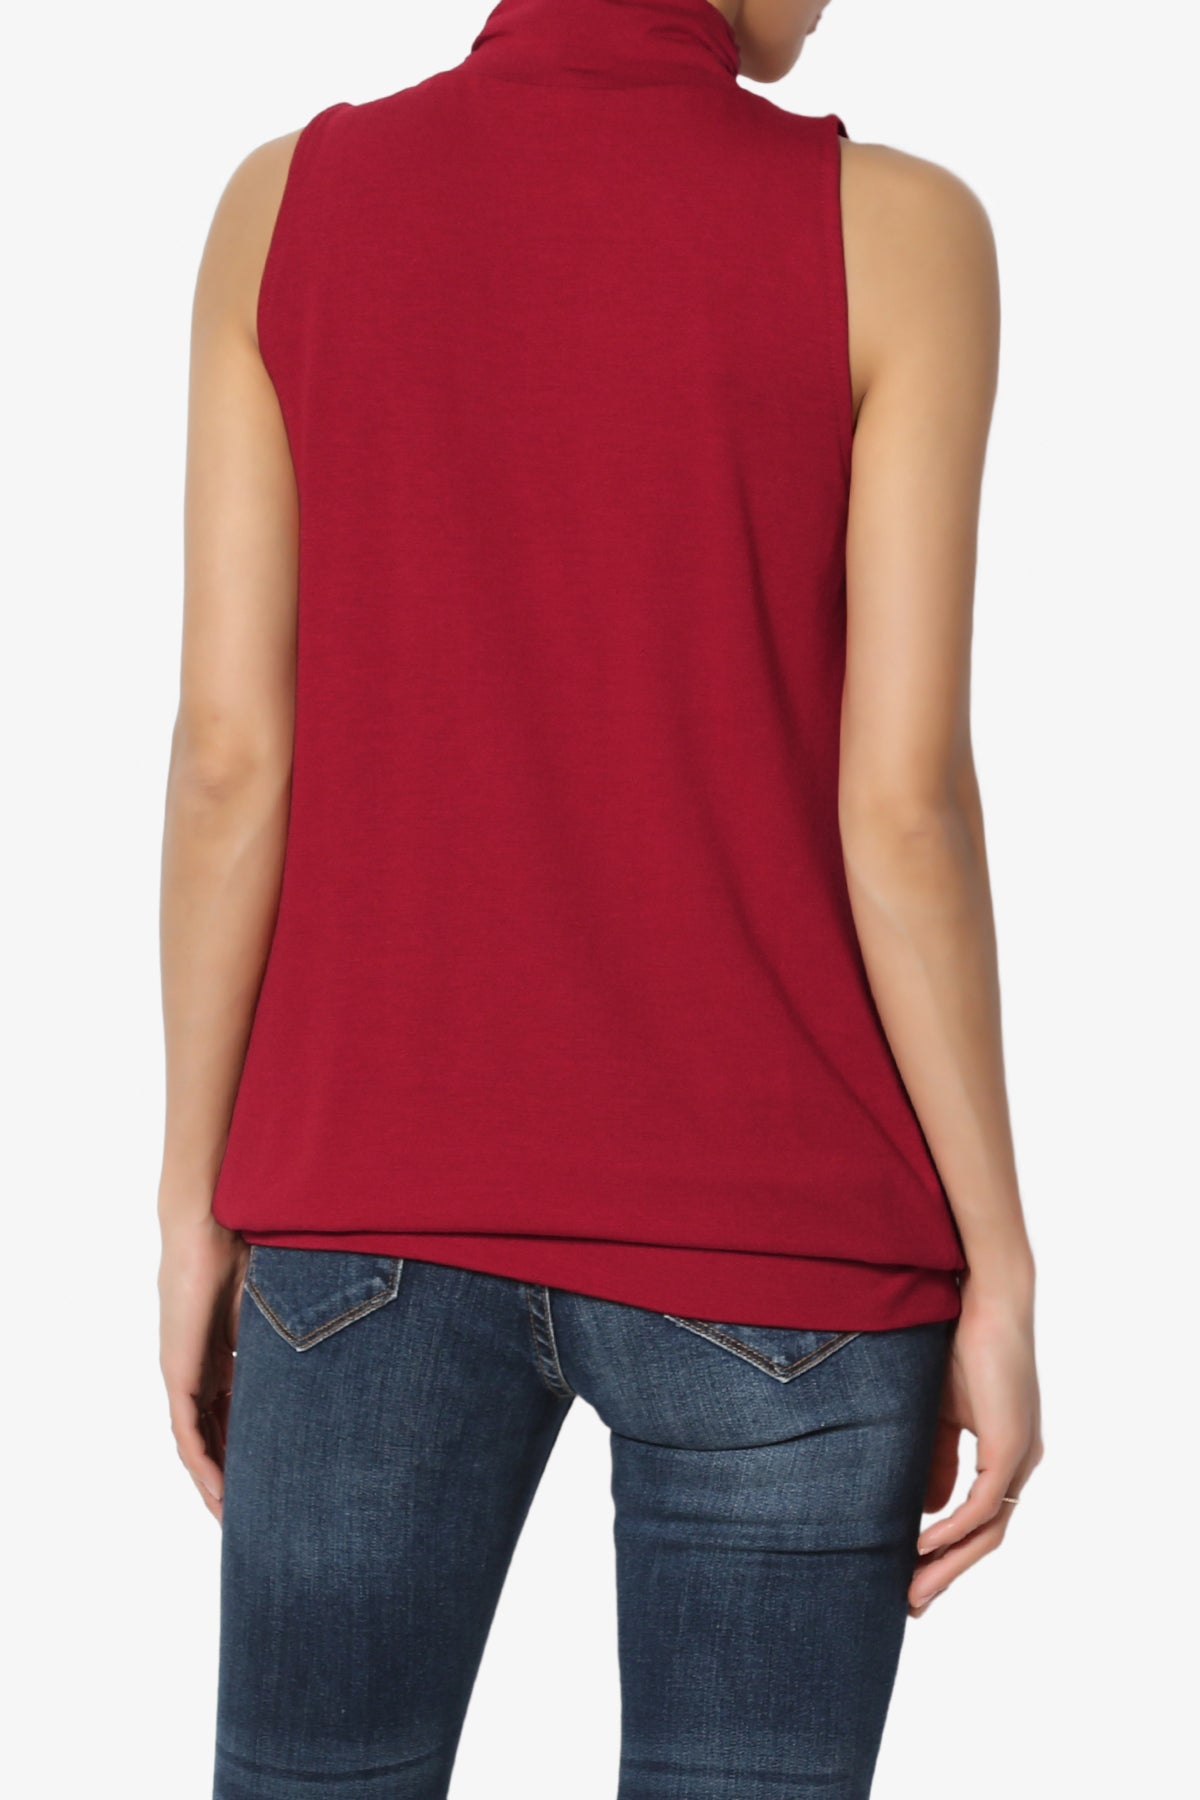 Load image into Gallery viewer, Jibbitz Sleeveless Mock Neck Pleated Top BURGUNDY_2
